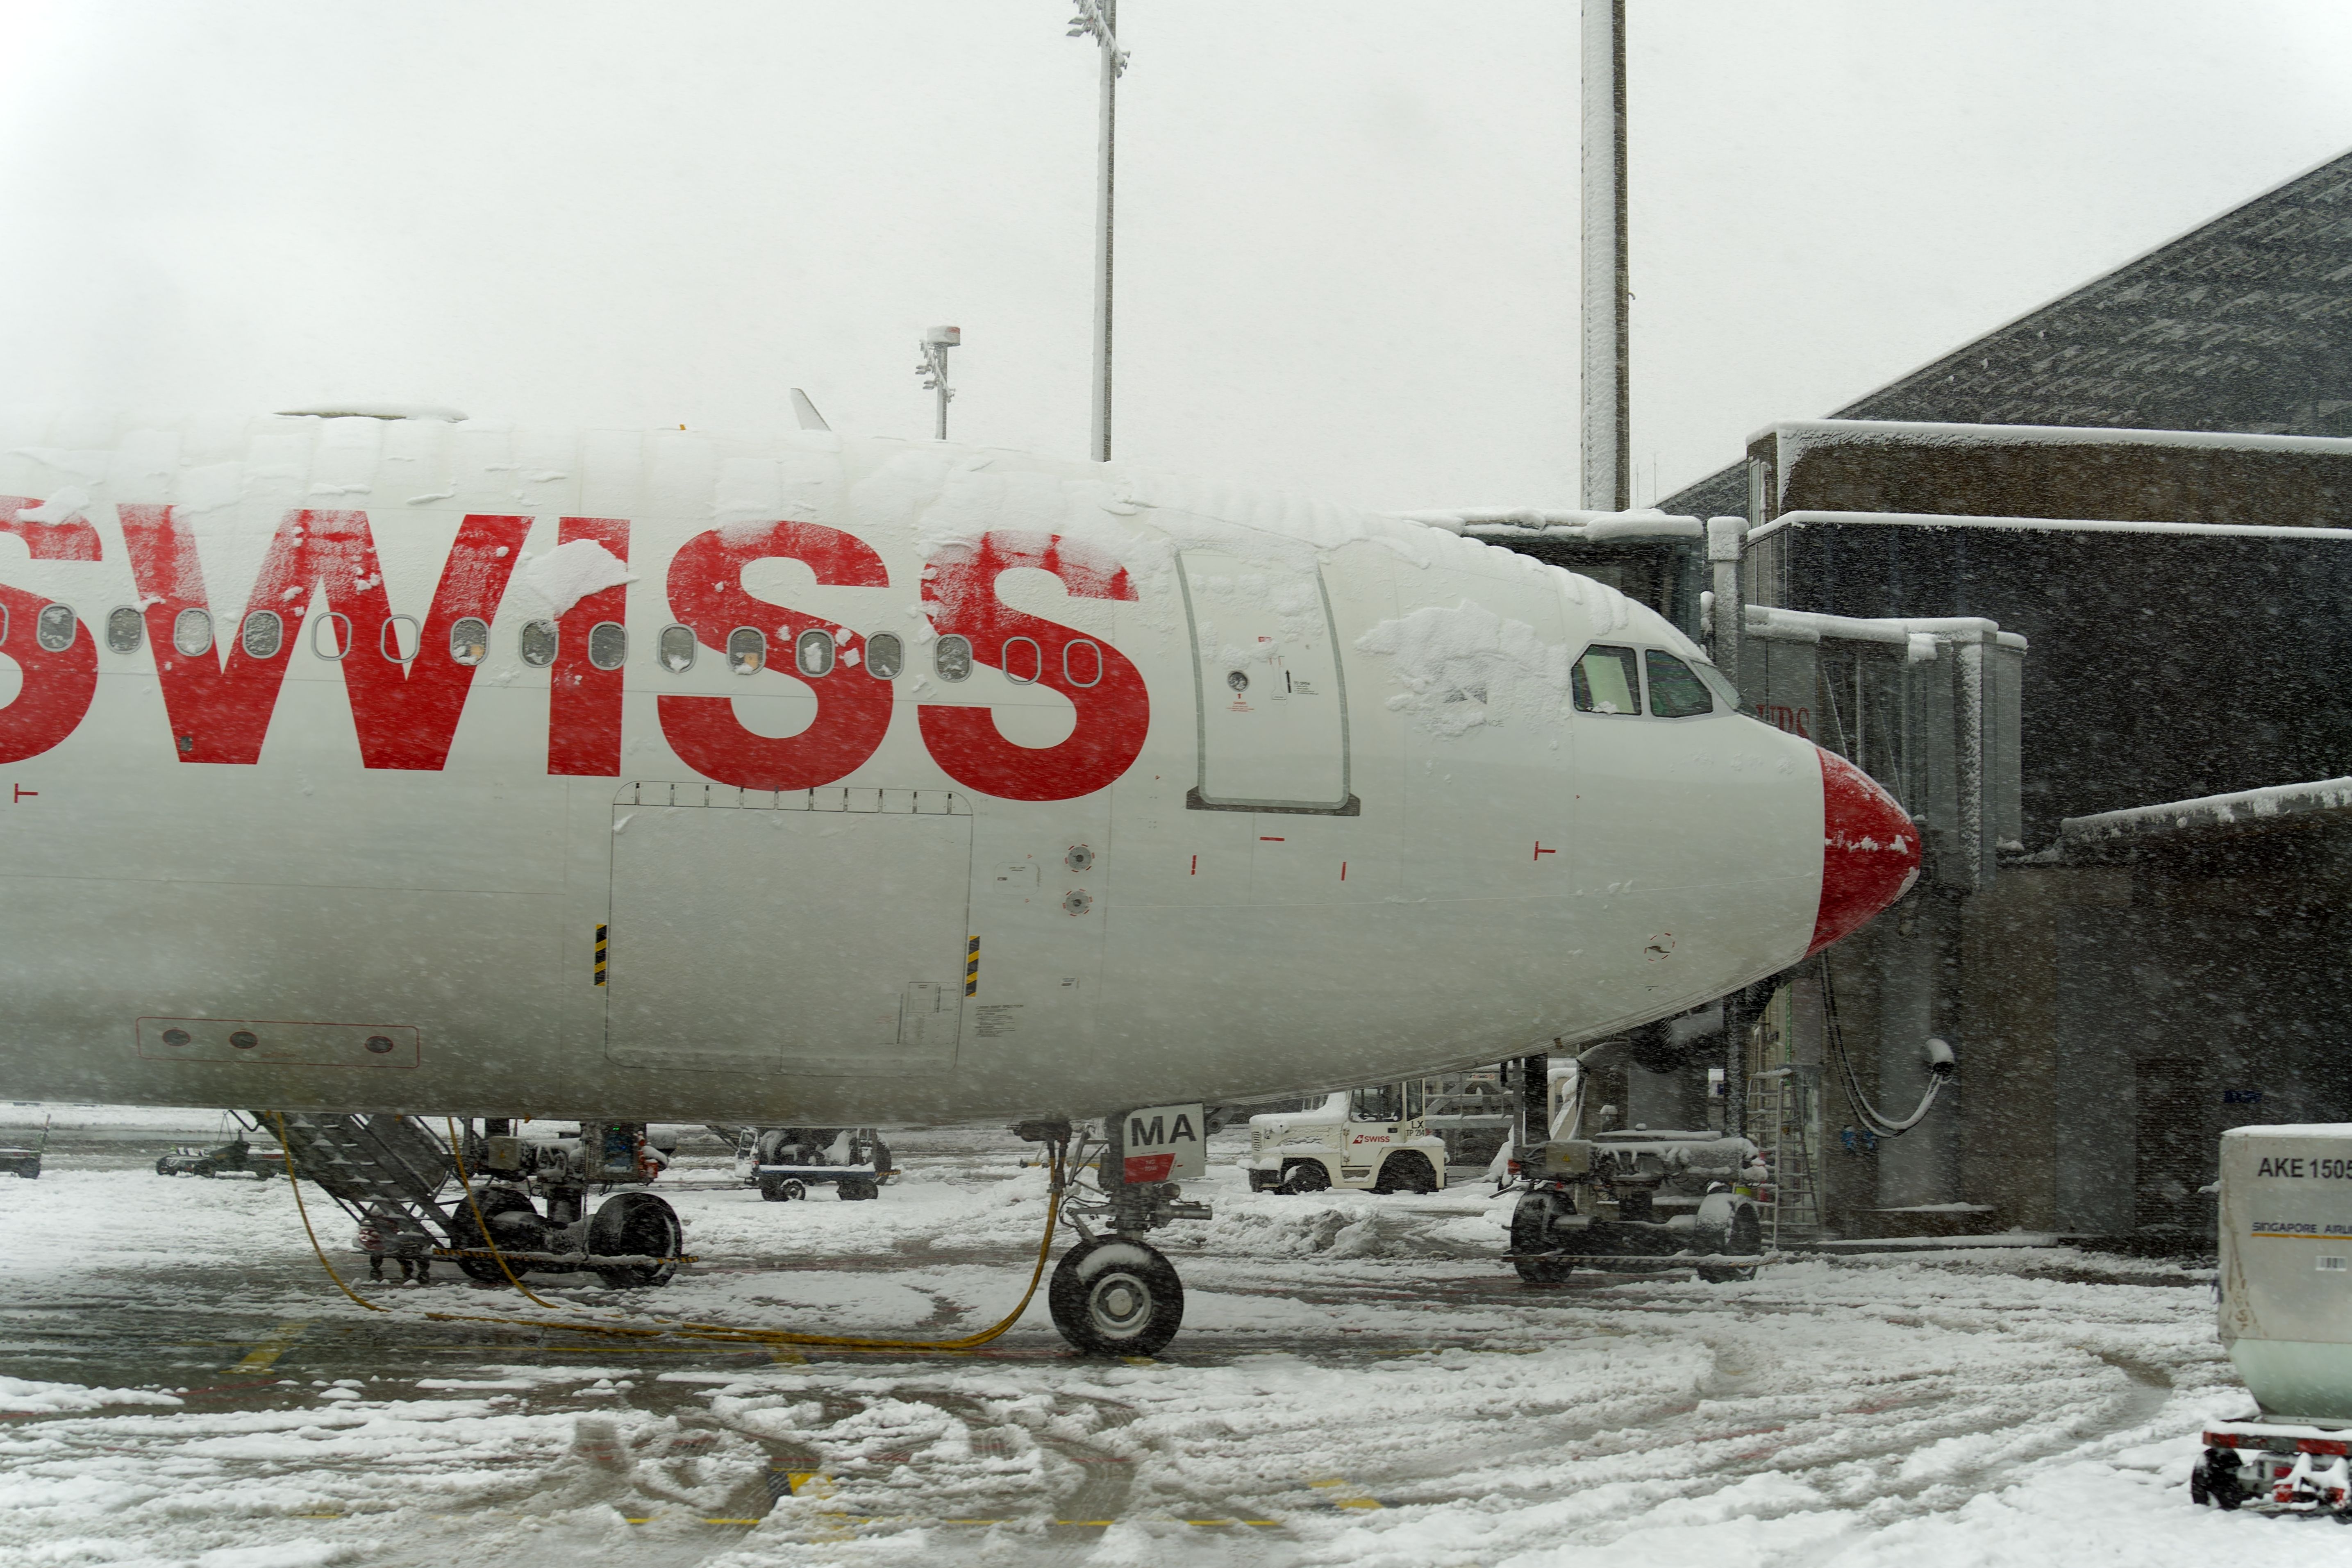 Swiss Air A340-300 with a Red Nose